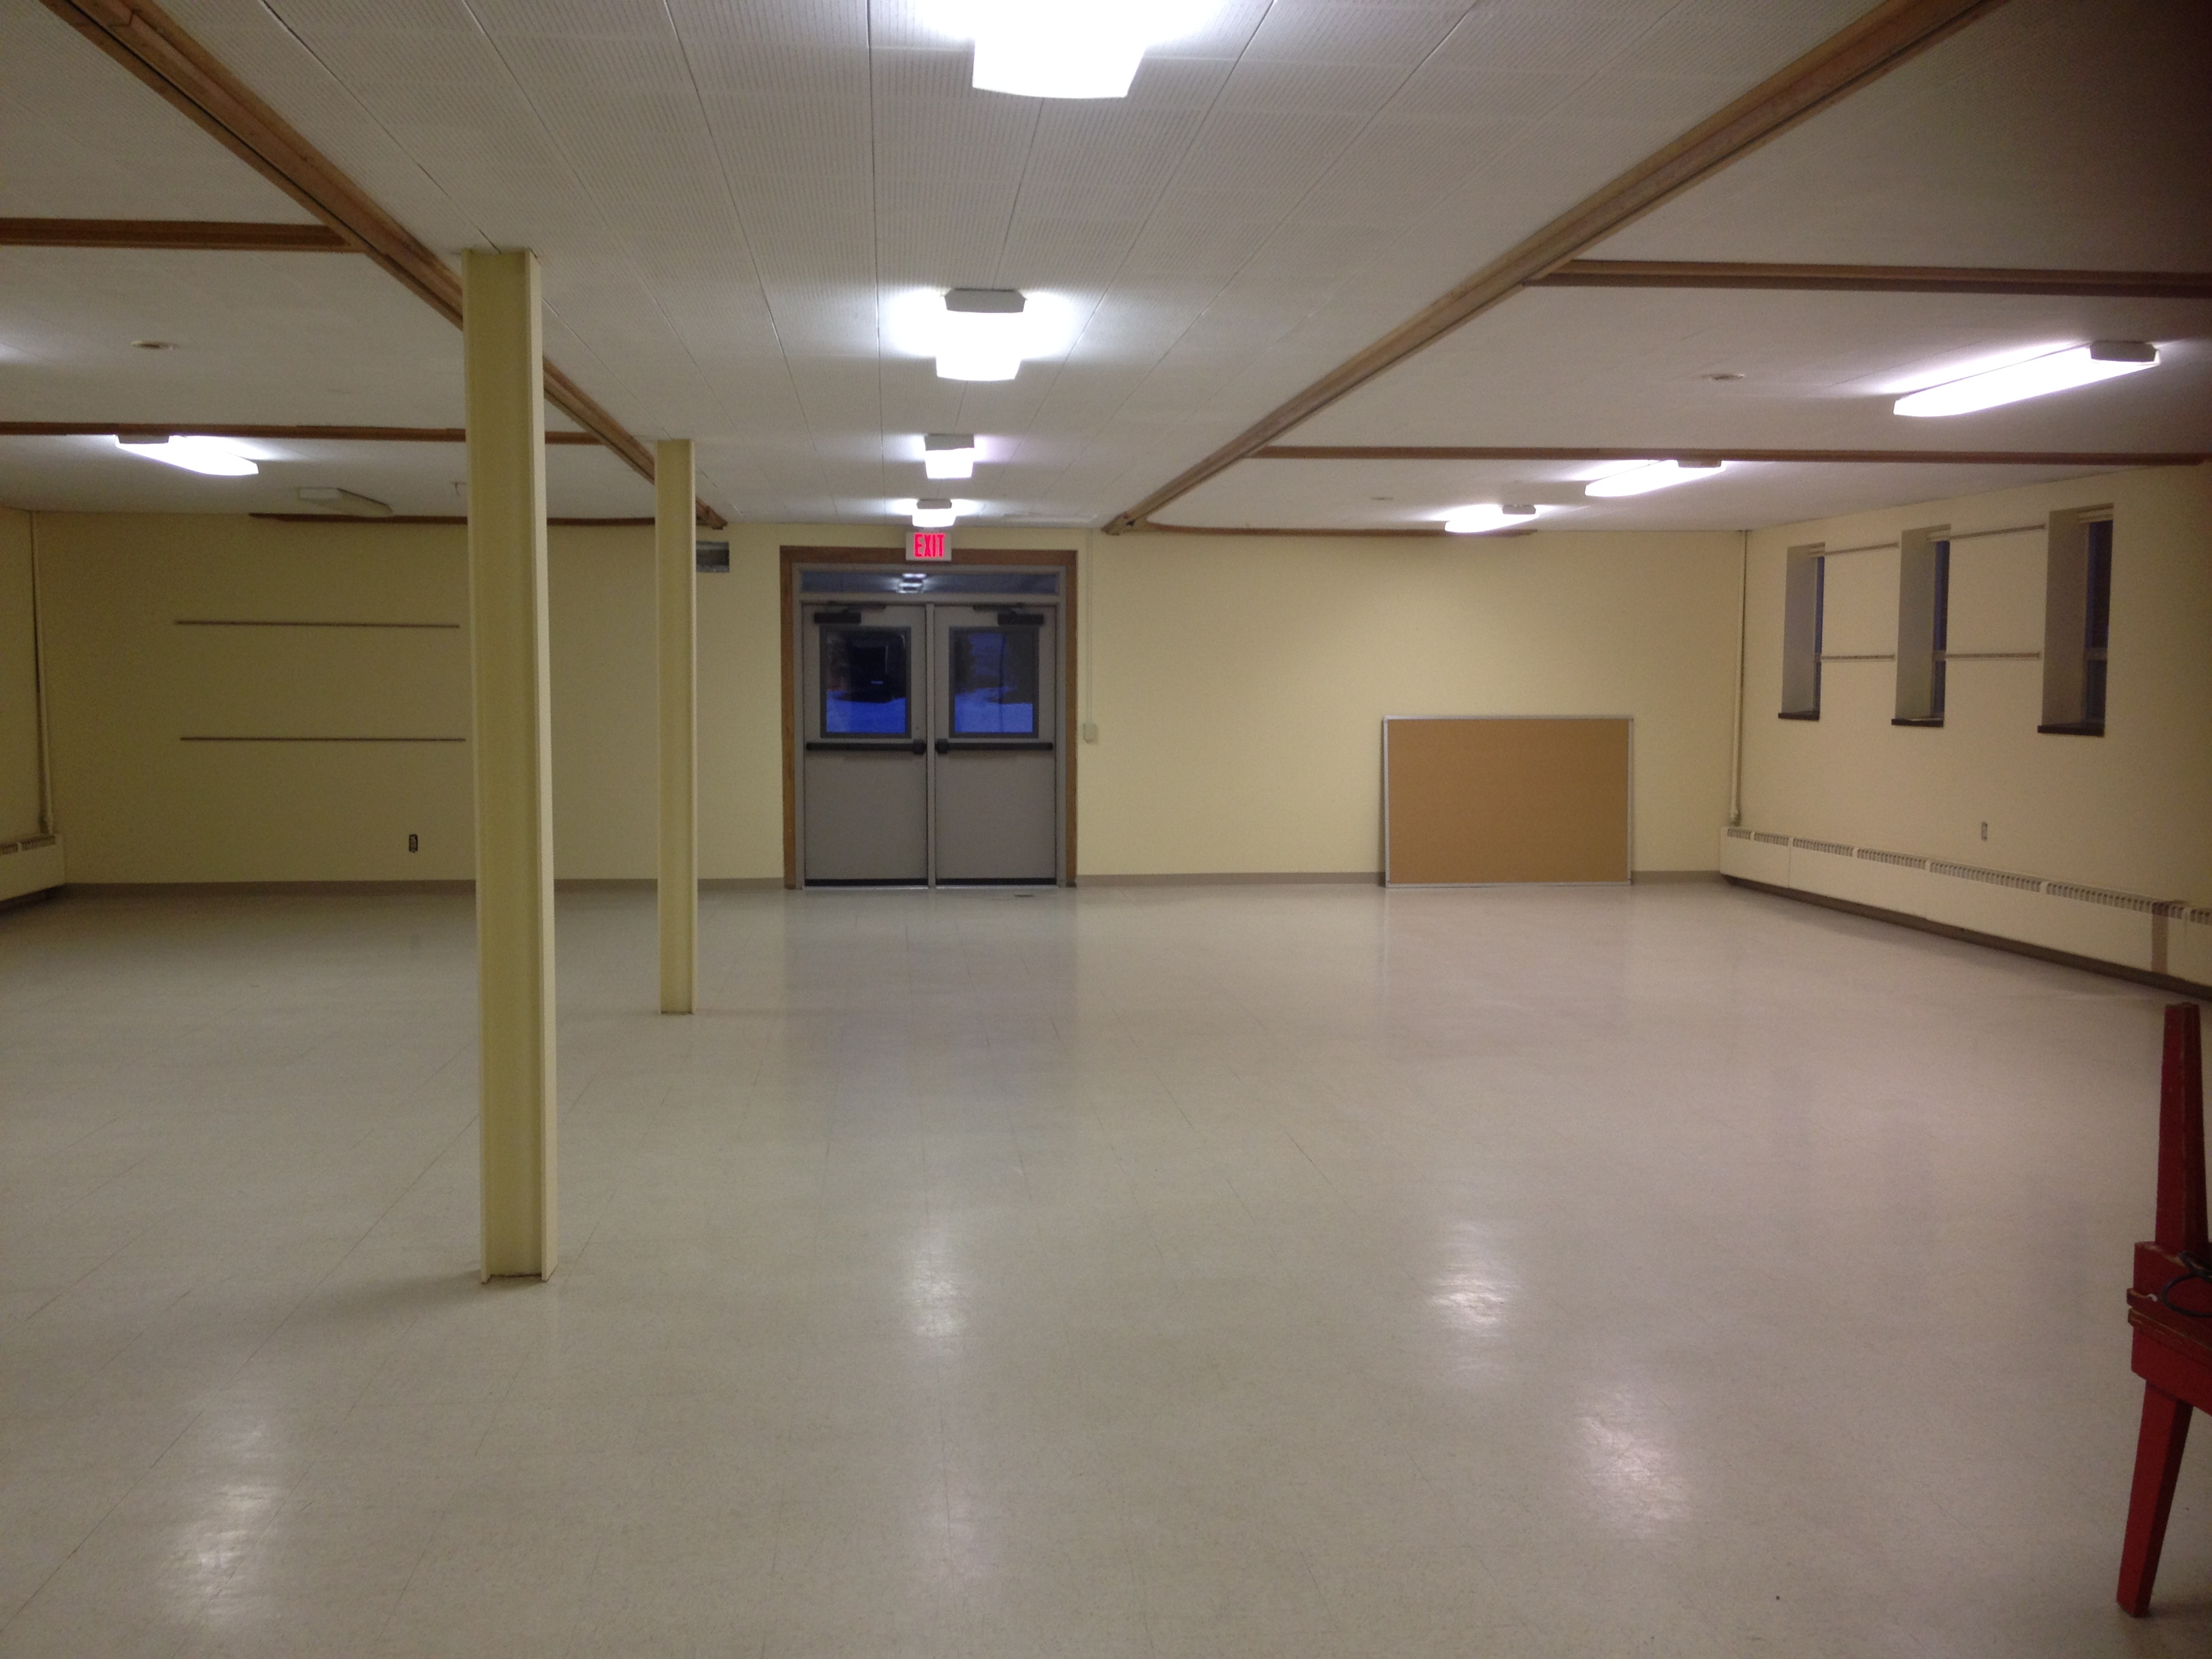 United Tai Chi Center Meeting Room Renovation Near Completion